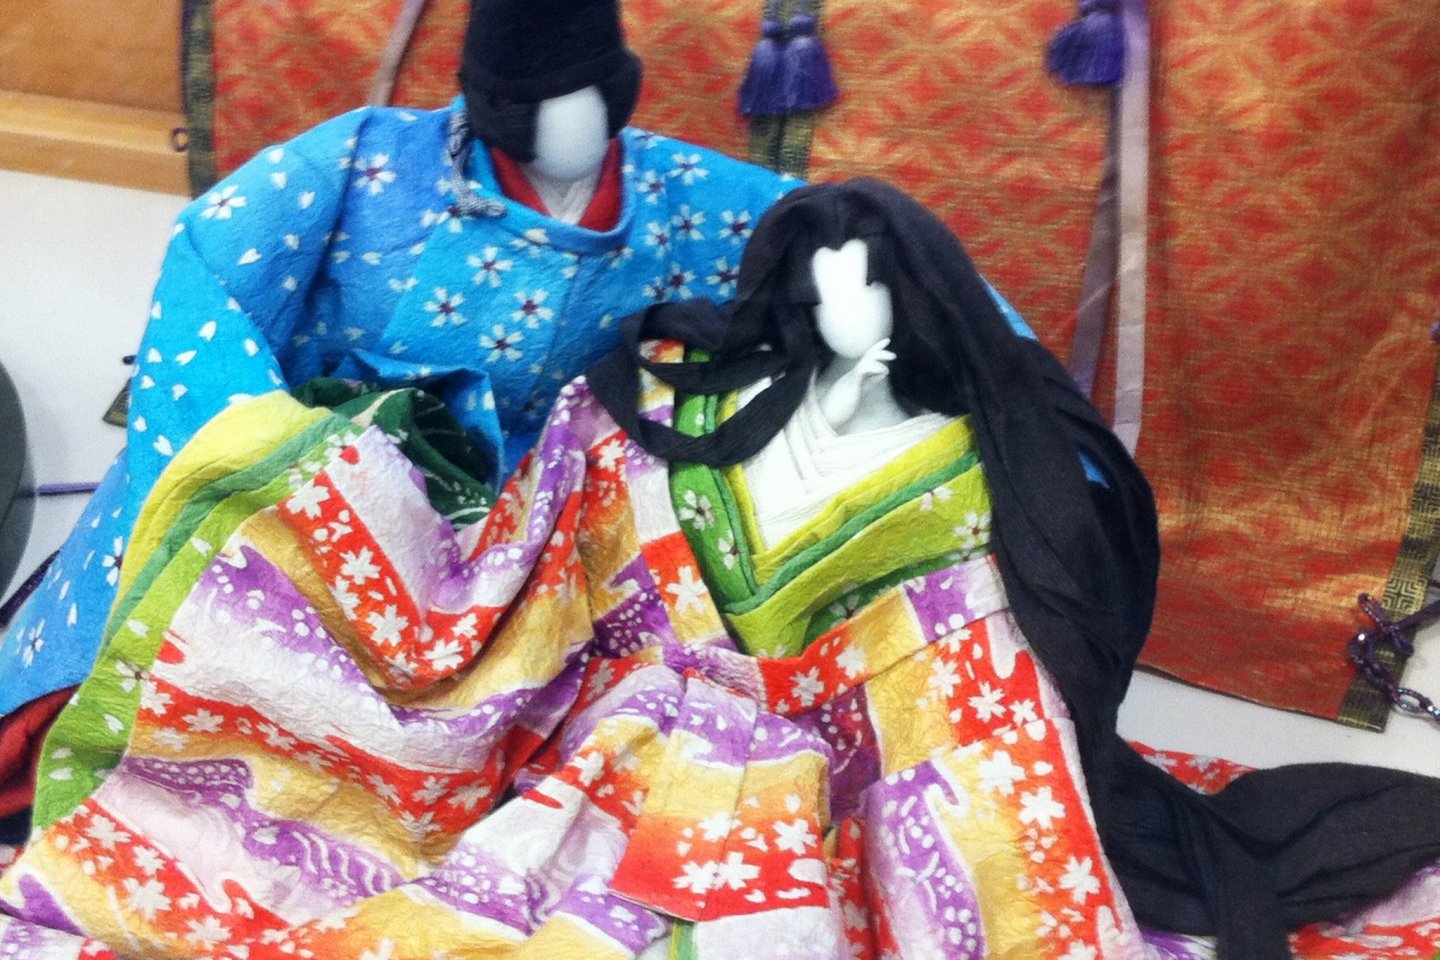 They can even make dolls with washi paper